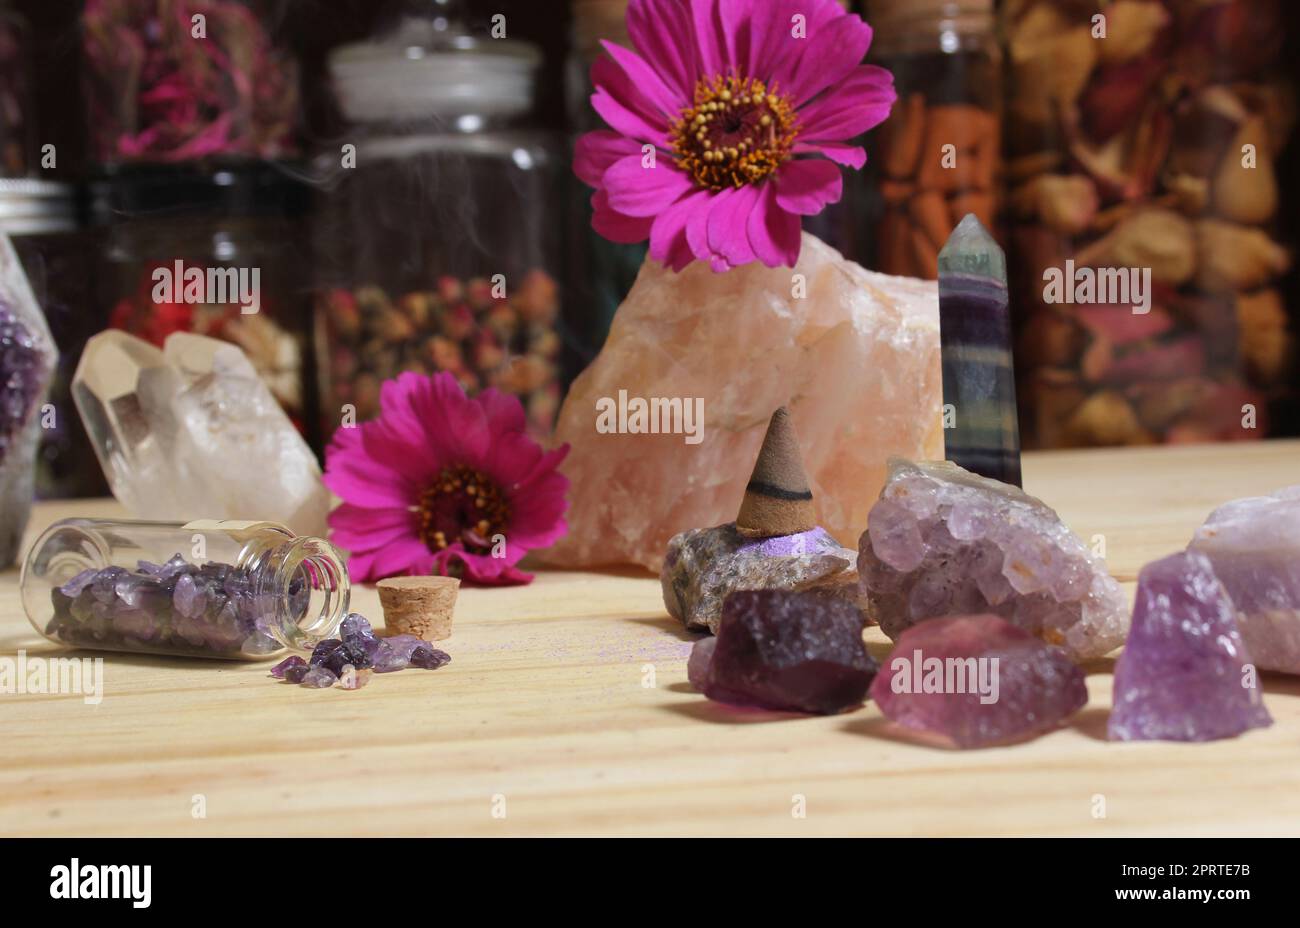 Amethyst Crystals With Flowers and Incense Cone on Meditation Table Stock Photo